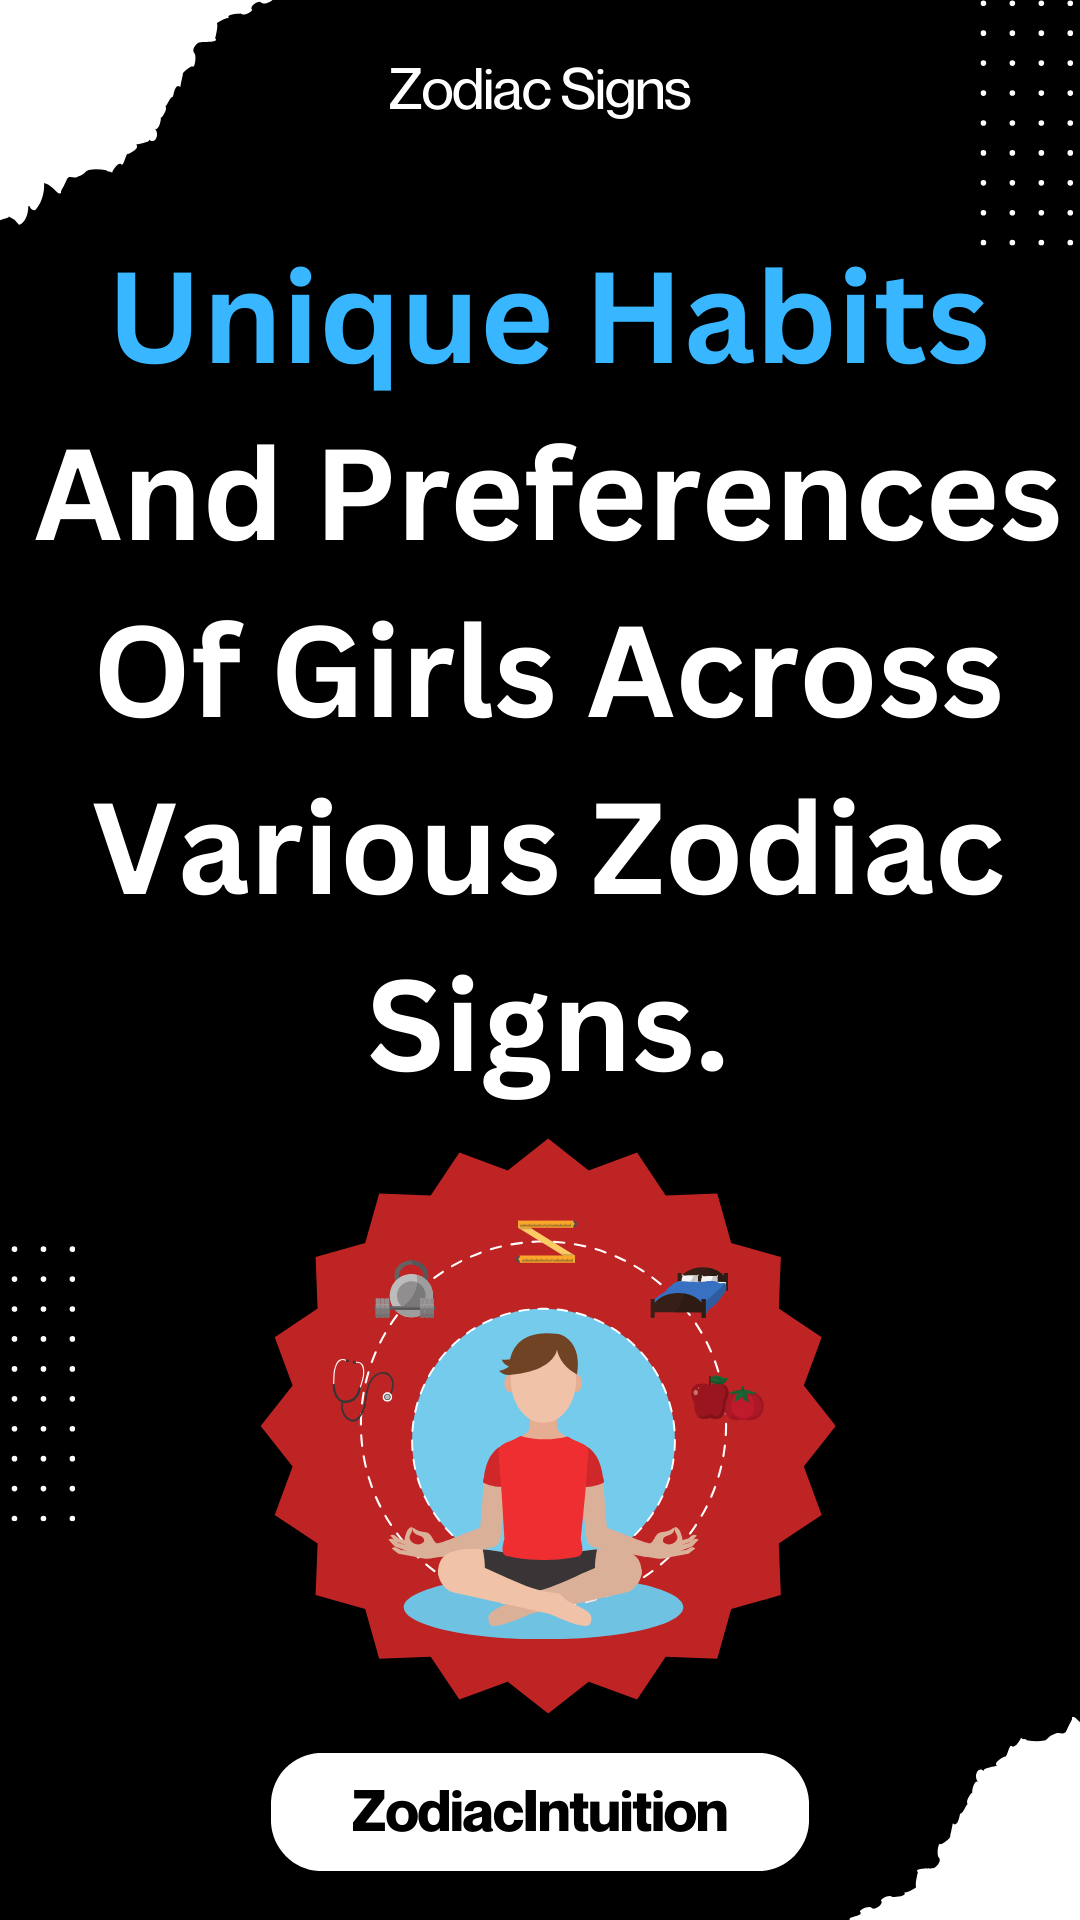 Unique Habits And Preferences Of Girls Across Various Zodiac Signs.